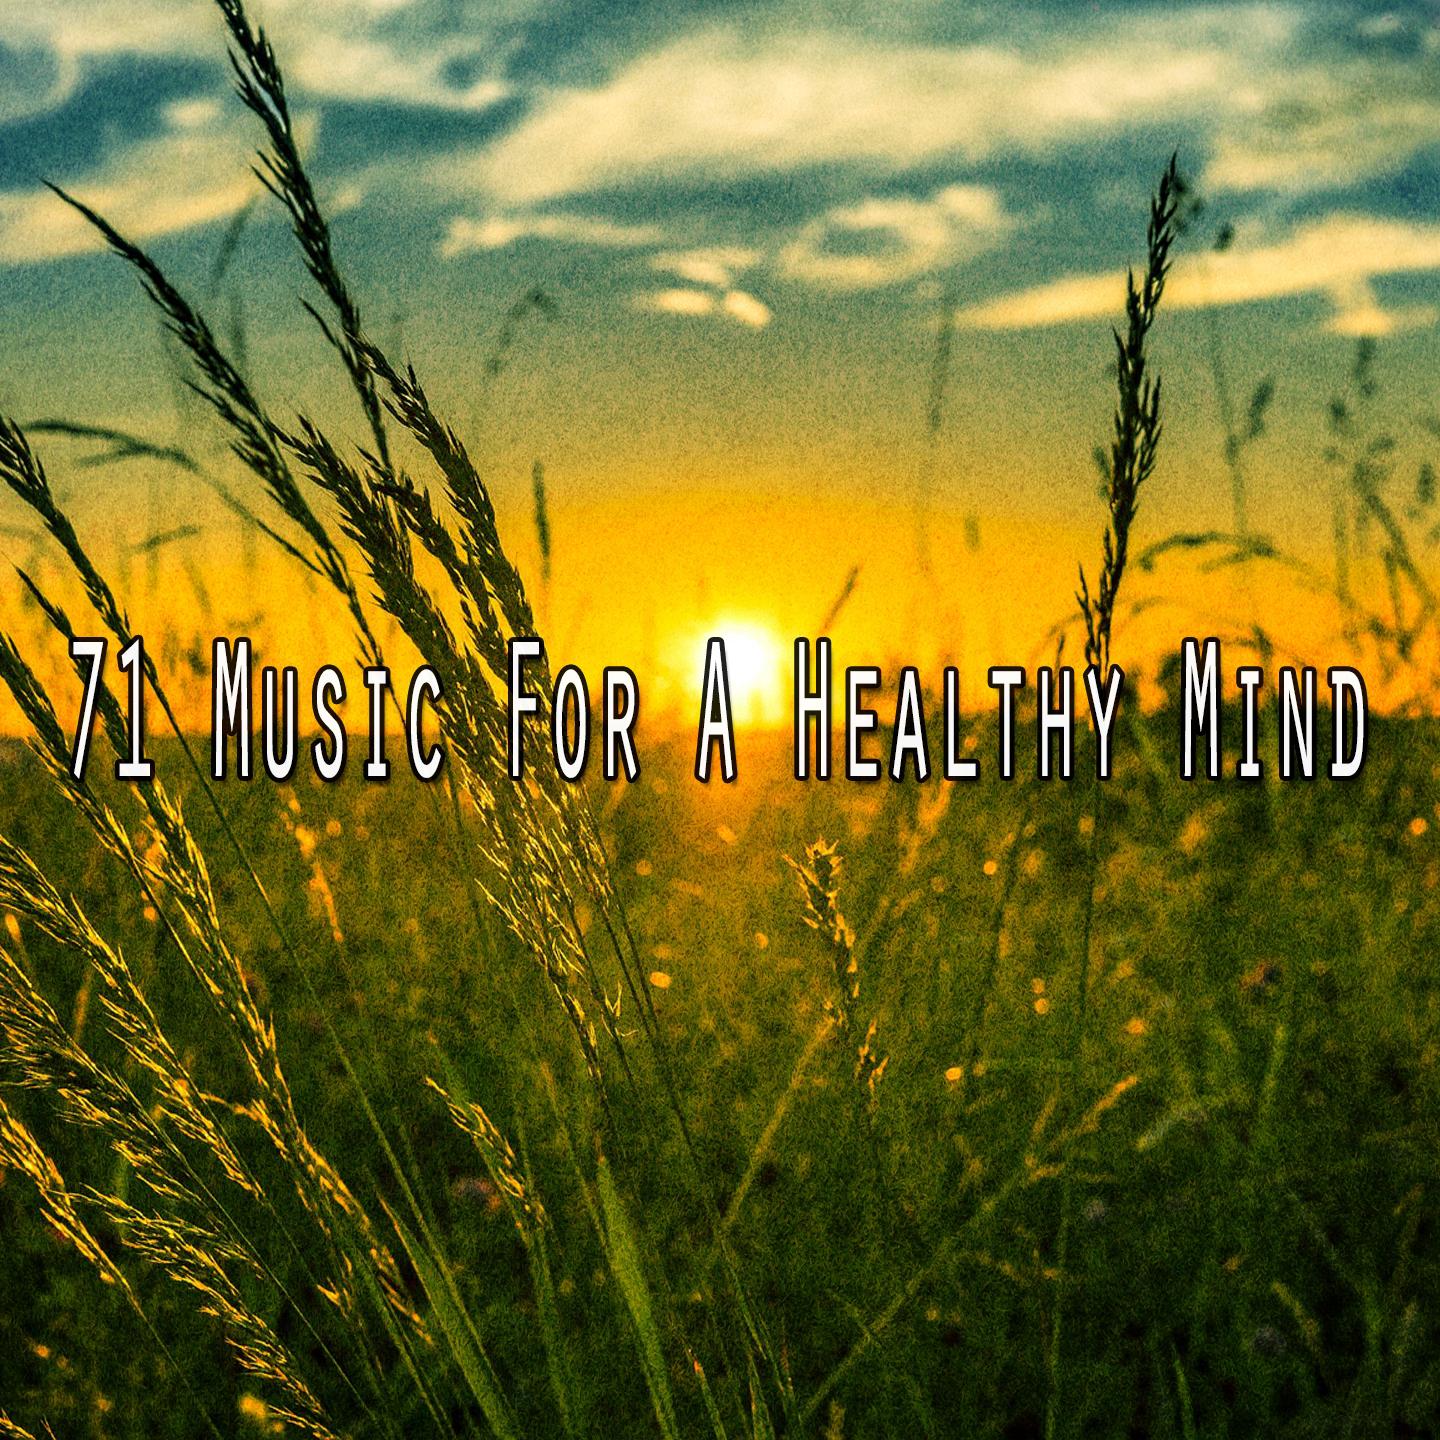 71 Music for a Healthy Mind